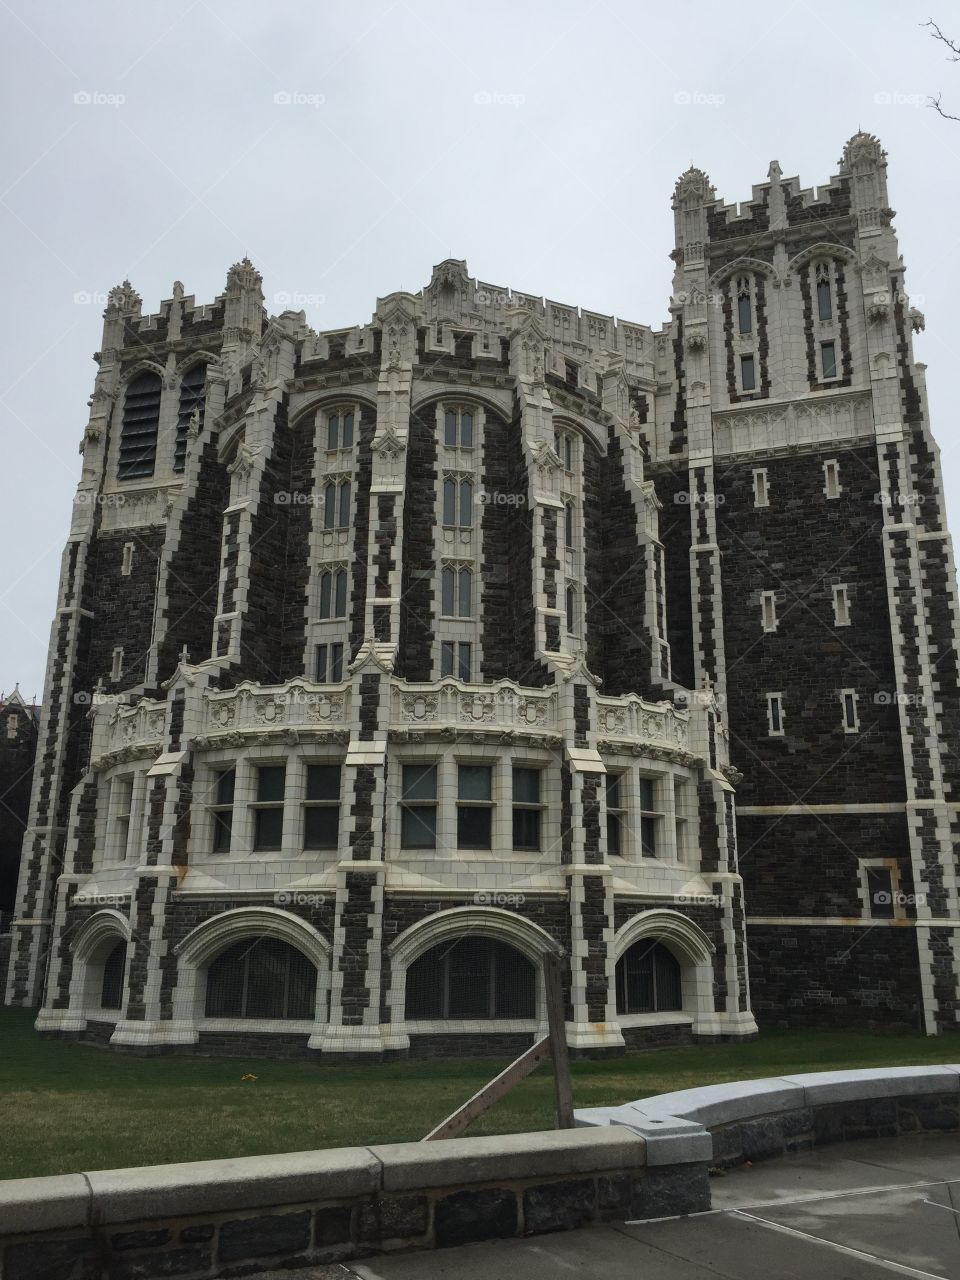 School. This is a building at CCNY